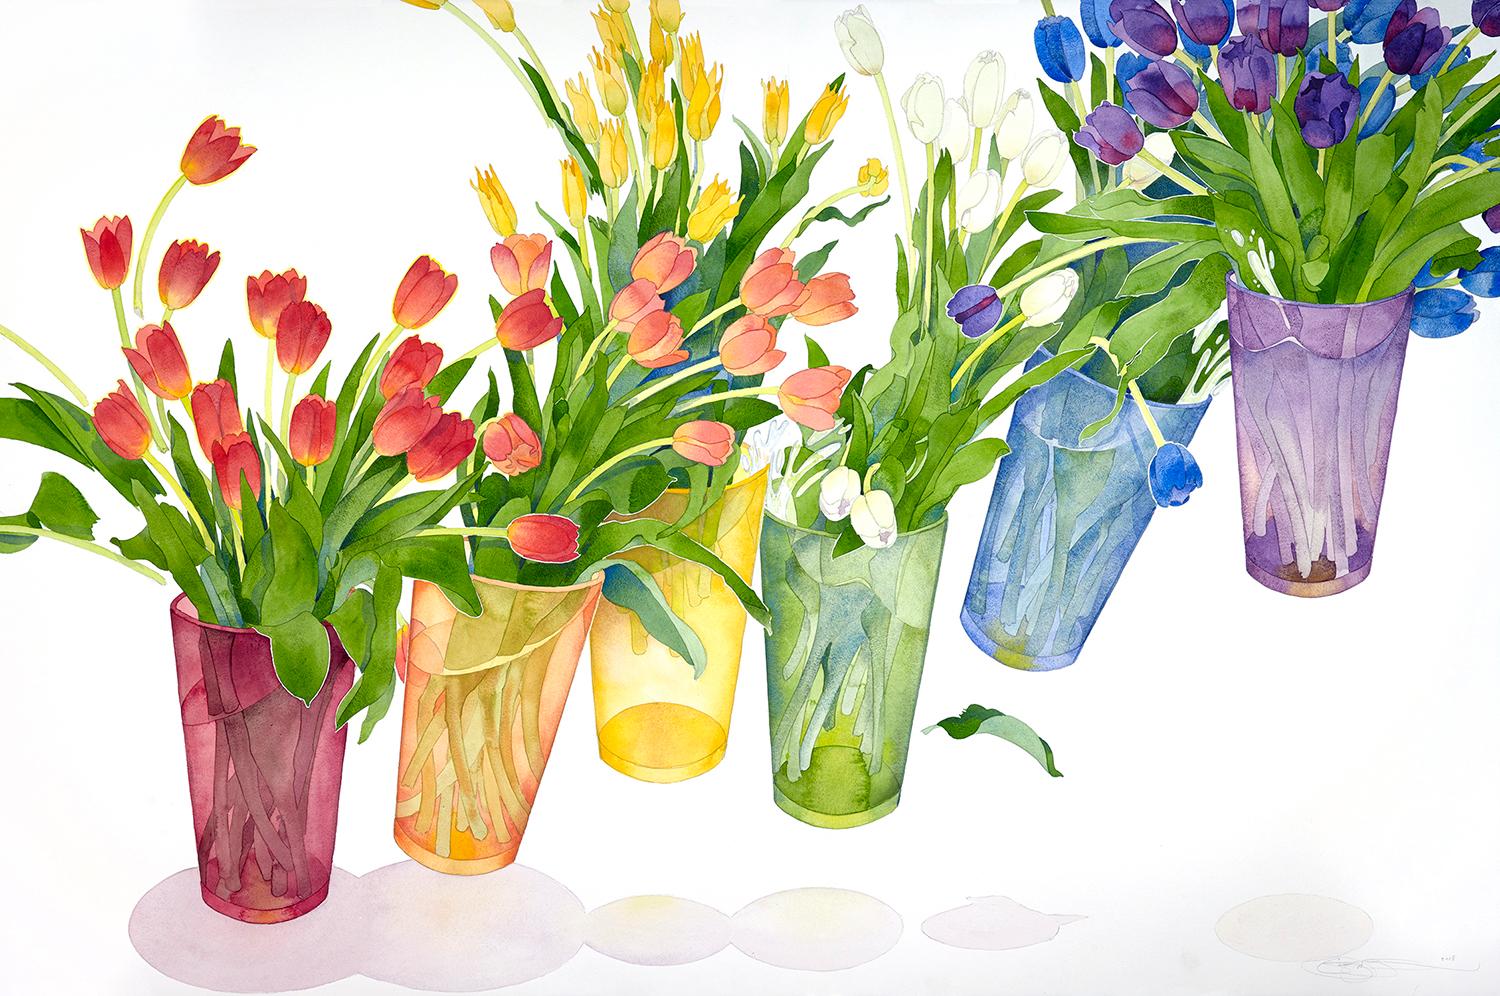 This lovely watercolor by the San Francisco artist Gary Bukovnik features an array to tulips in vases.  The colors are bright and vibrant with red, yellow, purple and blue flowers. This work is framed under plexiglass and a hand-made white lacquered